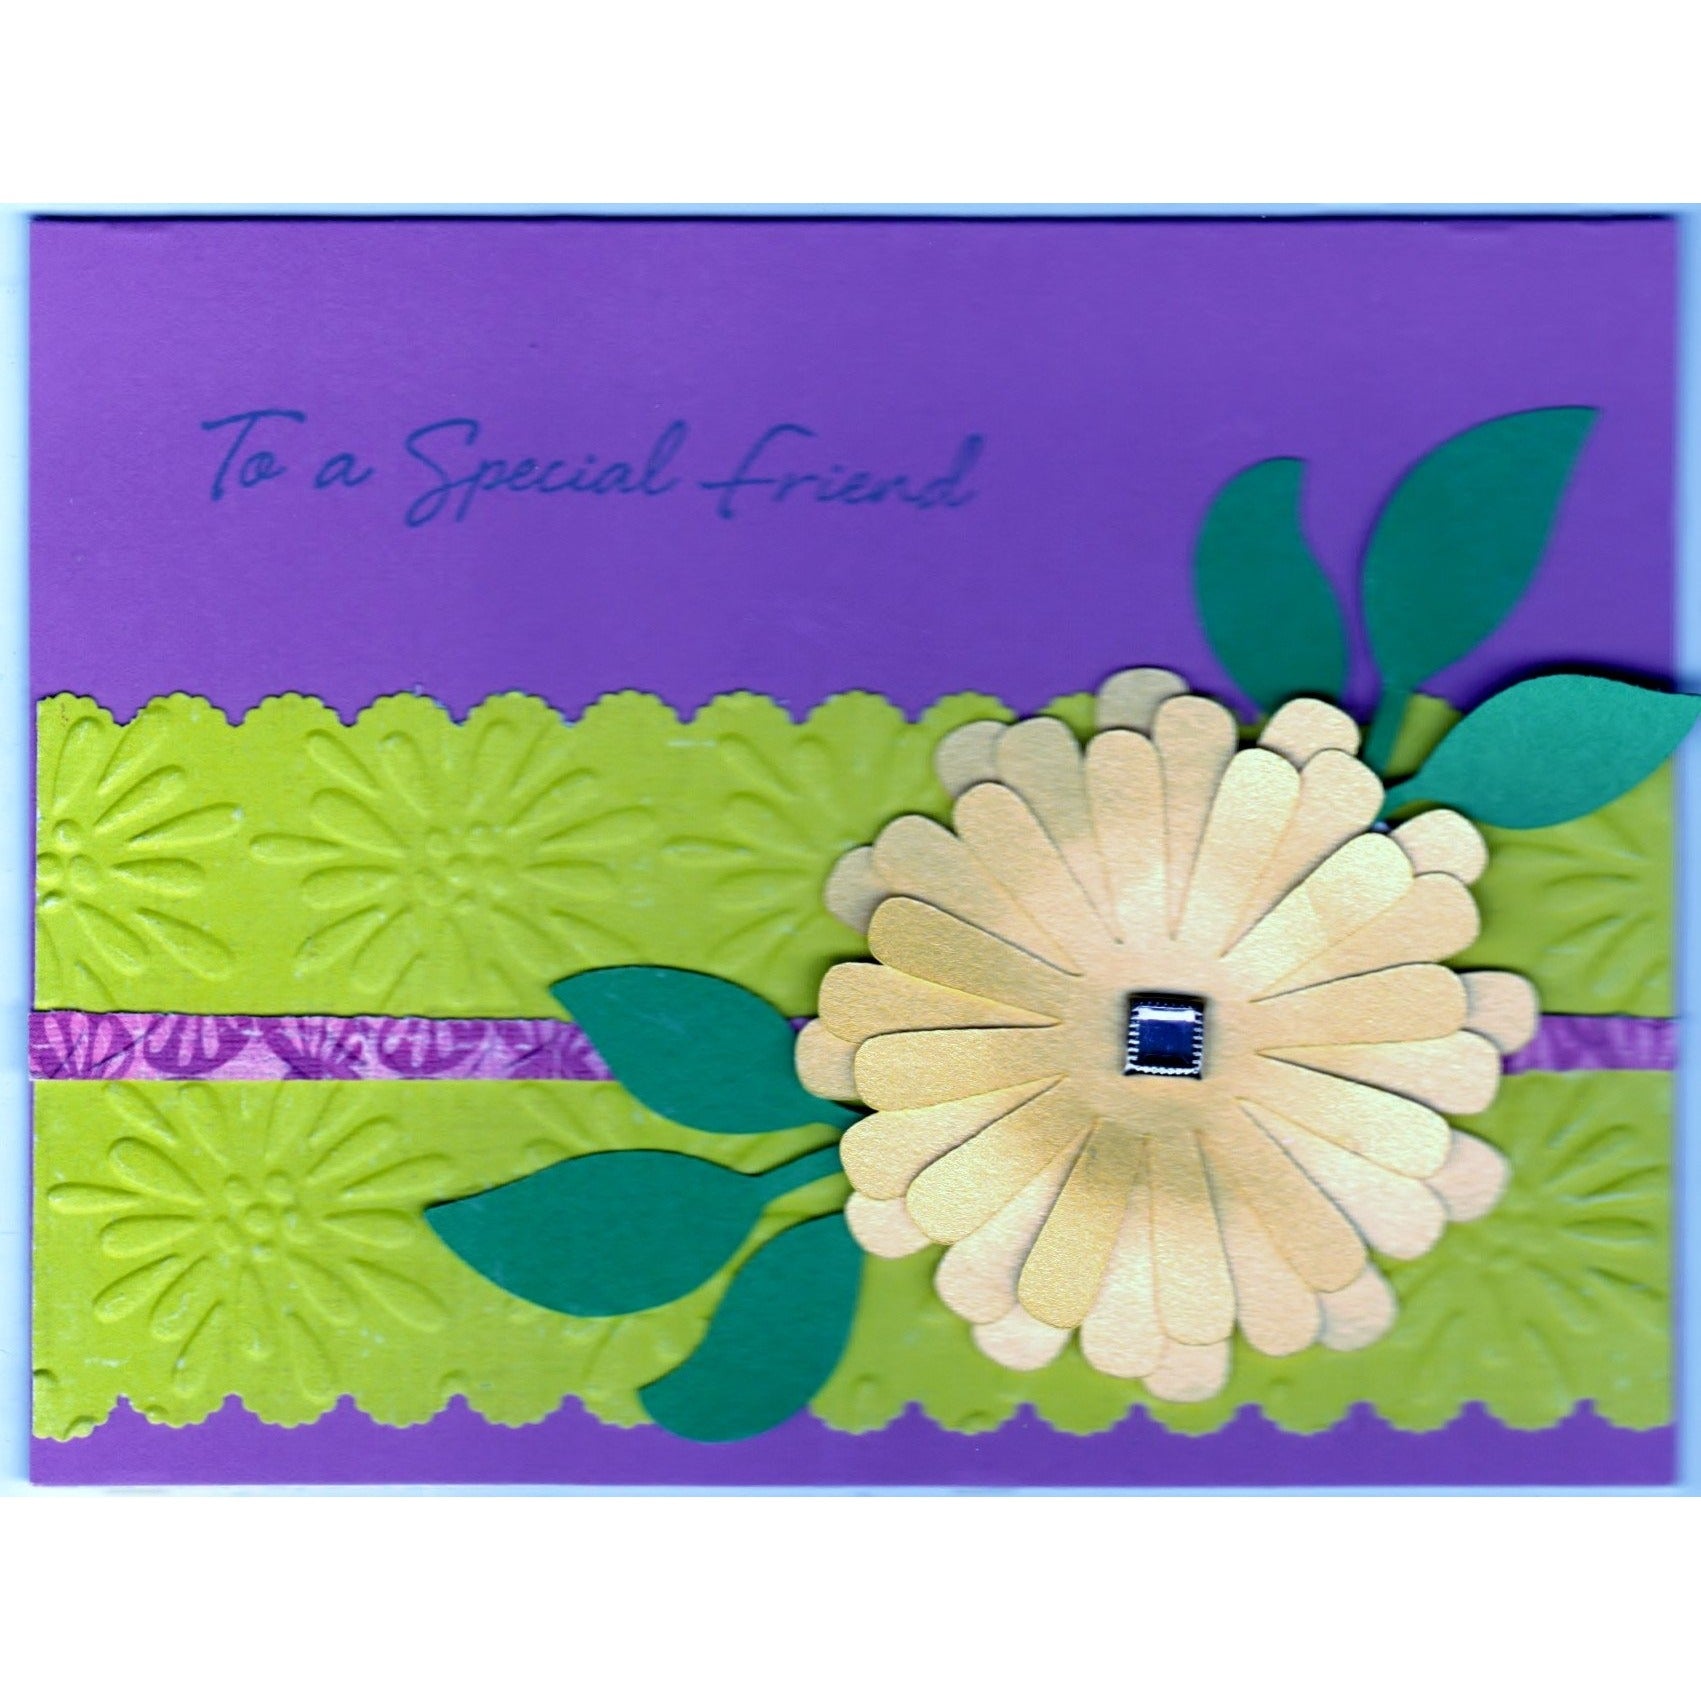 Daisy Background Handmade Good Greeting Supply Card - Cards And Other Paper Products - Made In U.S.A. - SharPharMade - 1